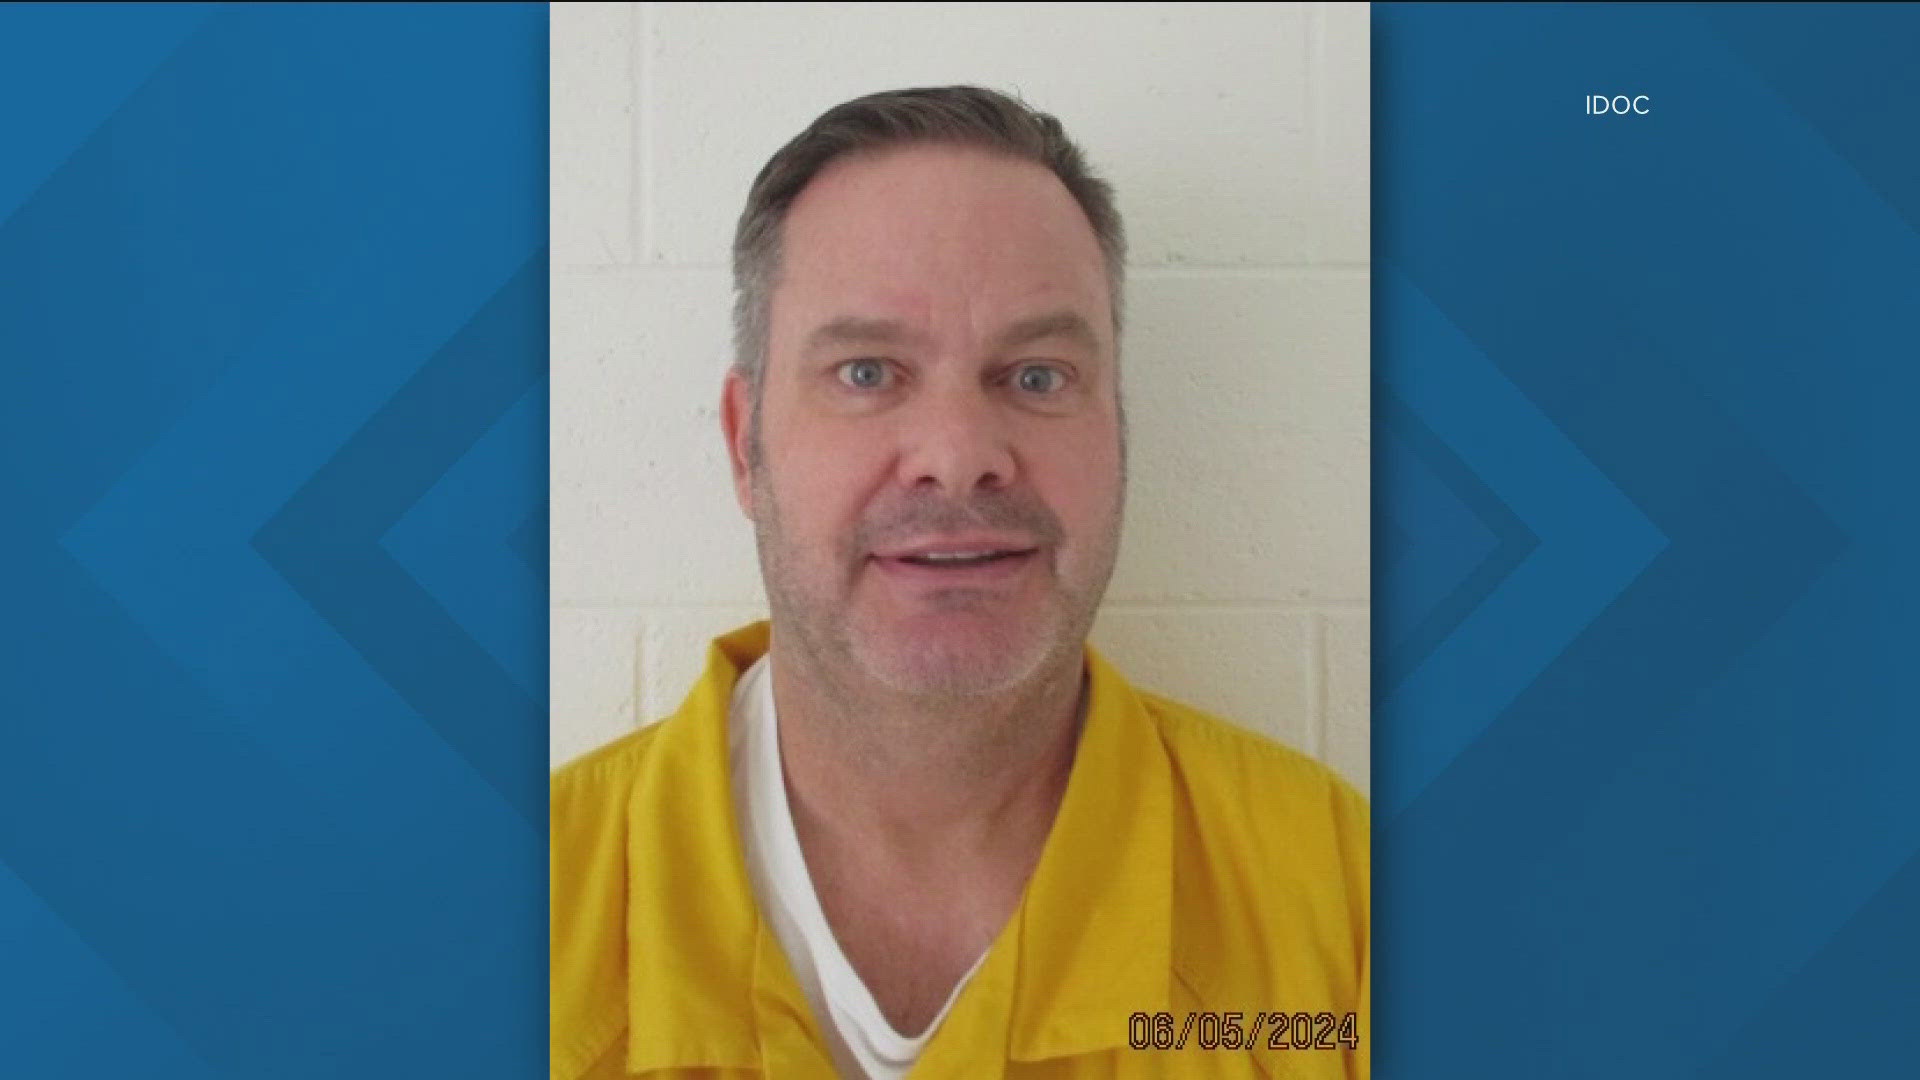 Records indicate Daybell was moved to the Idaho Maximum Security Institution outside of Boise this week. His booking photo was released Friday.